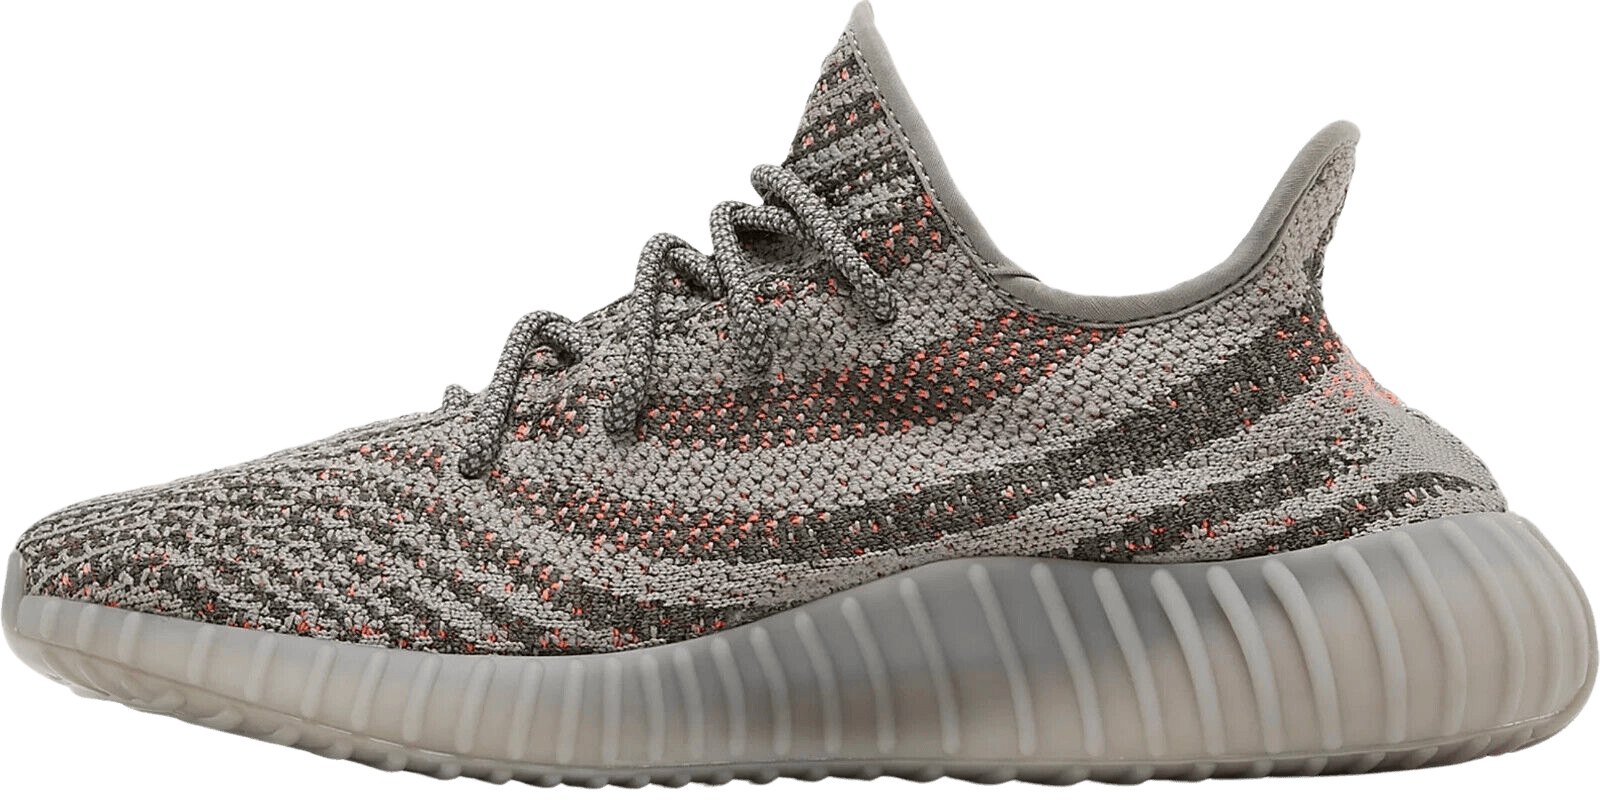 All You Need to Know About the Yeezy Boost 350 V2 Beluga Reflective  Sneakers | eBay